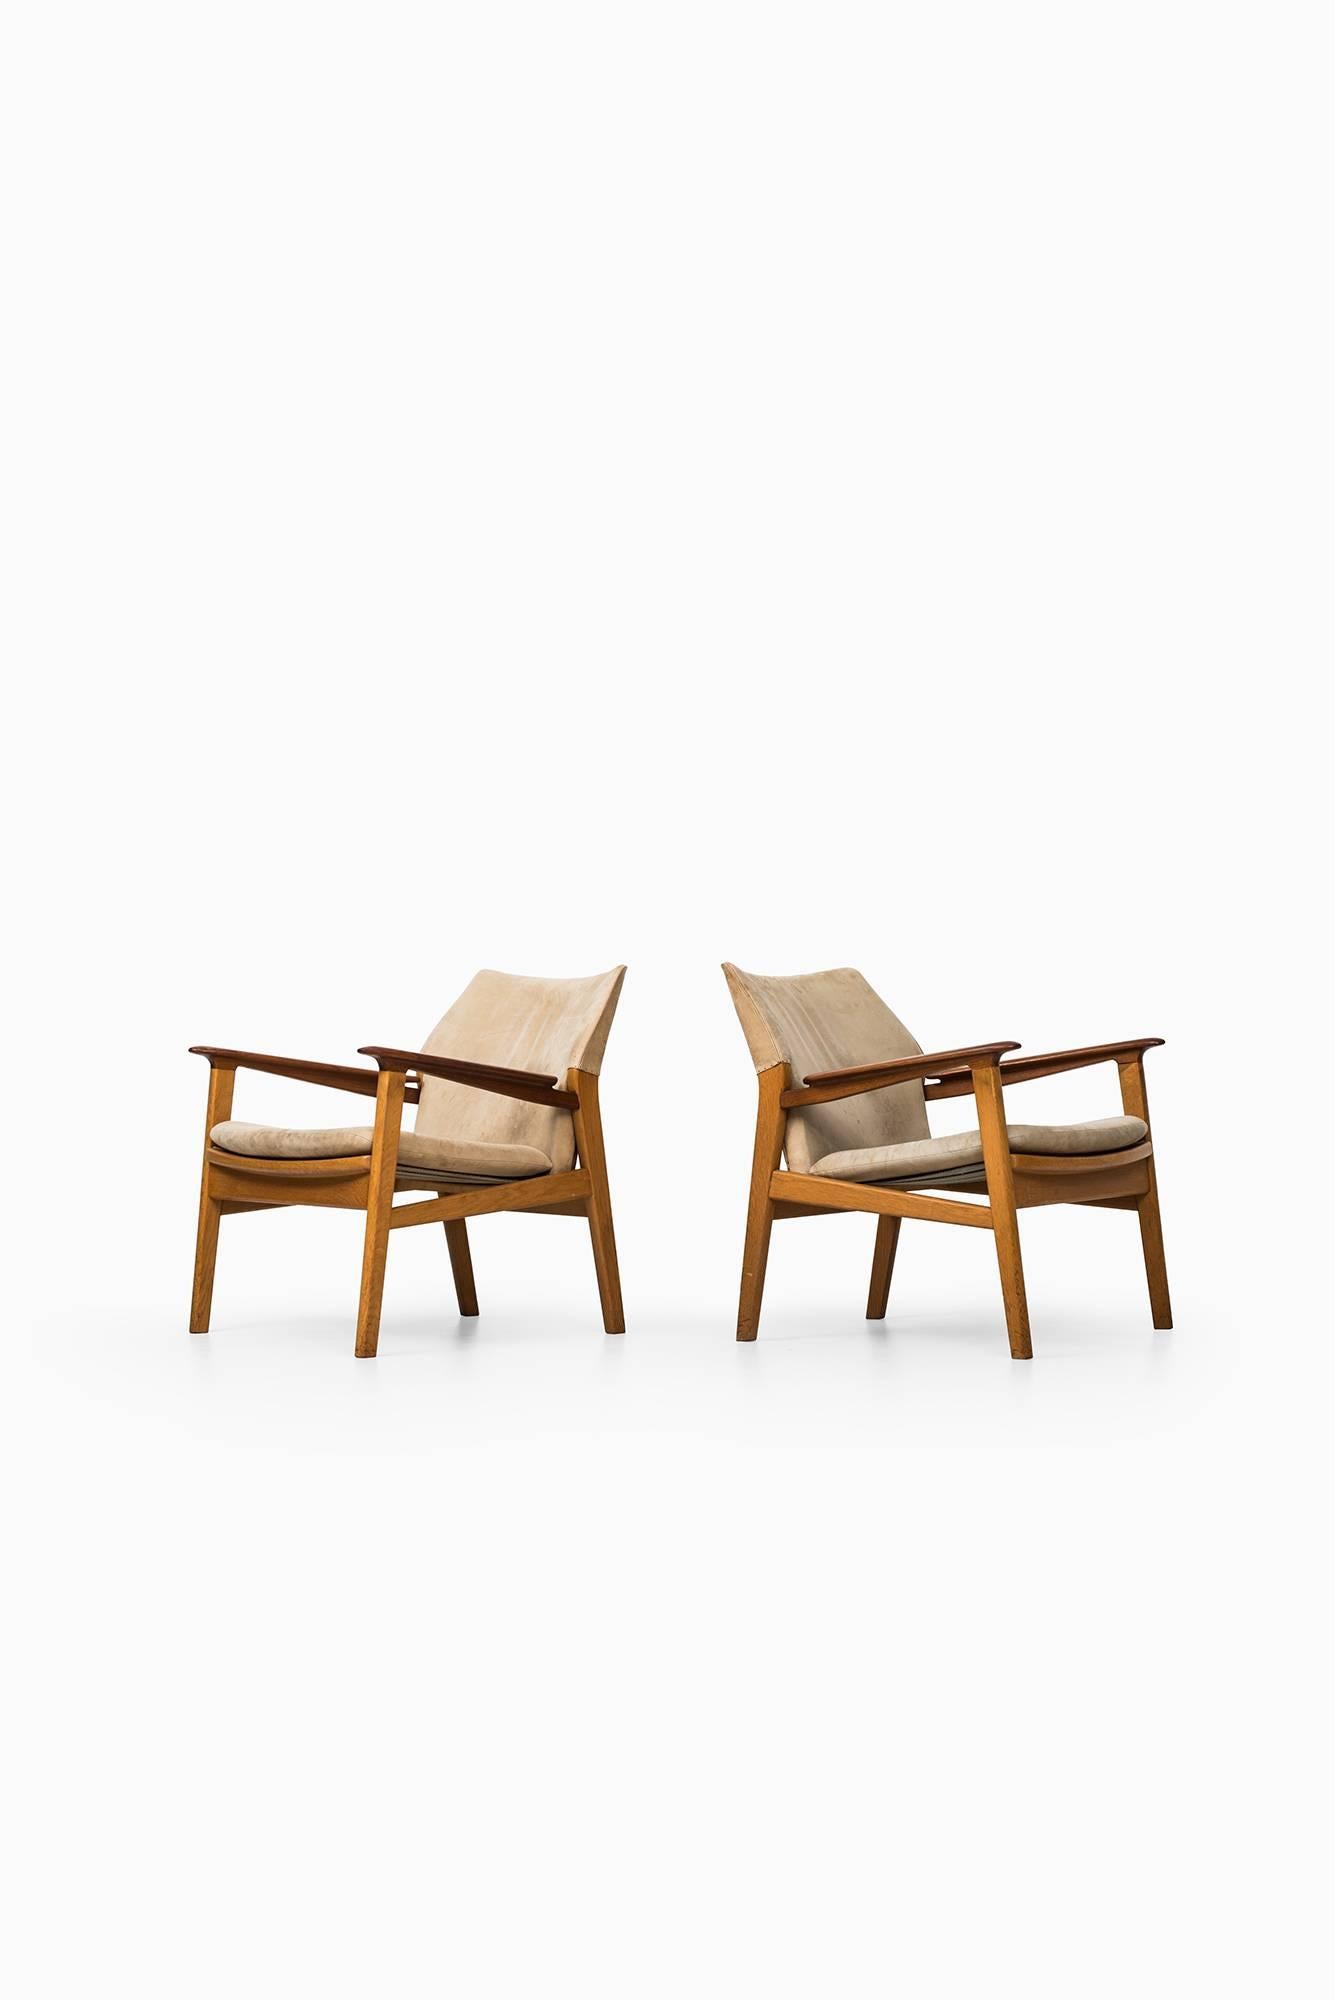 Rare pair of easy chairs model 9015 designed by Hans Olsen. Produced by Gärsnäs in Sweden.